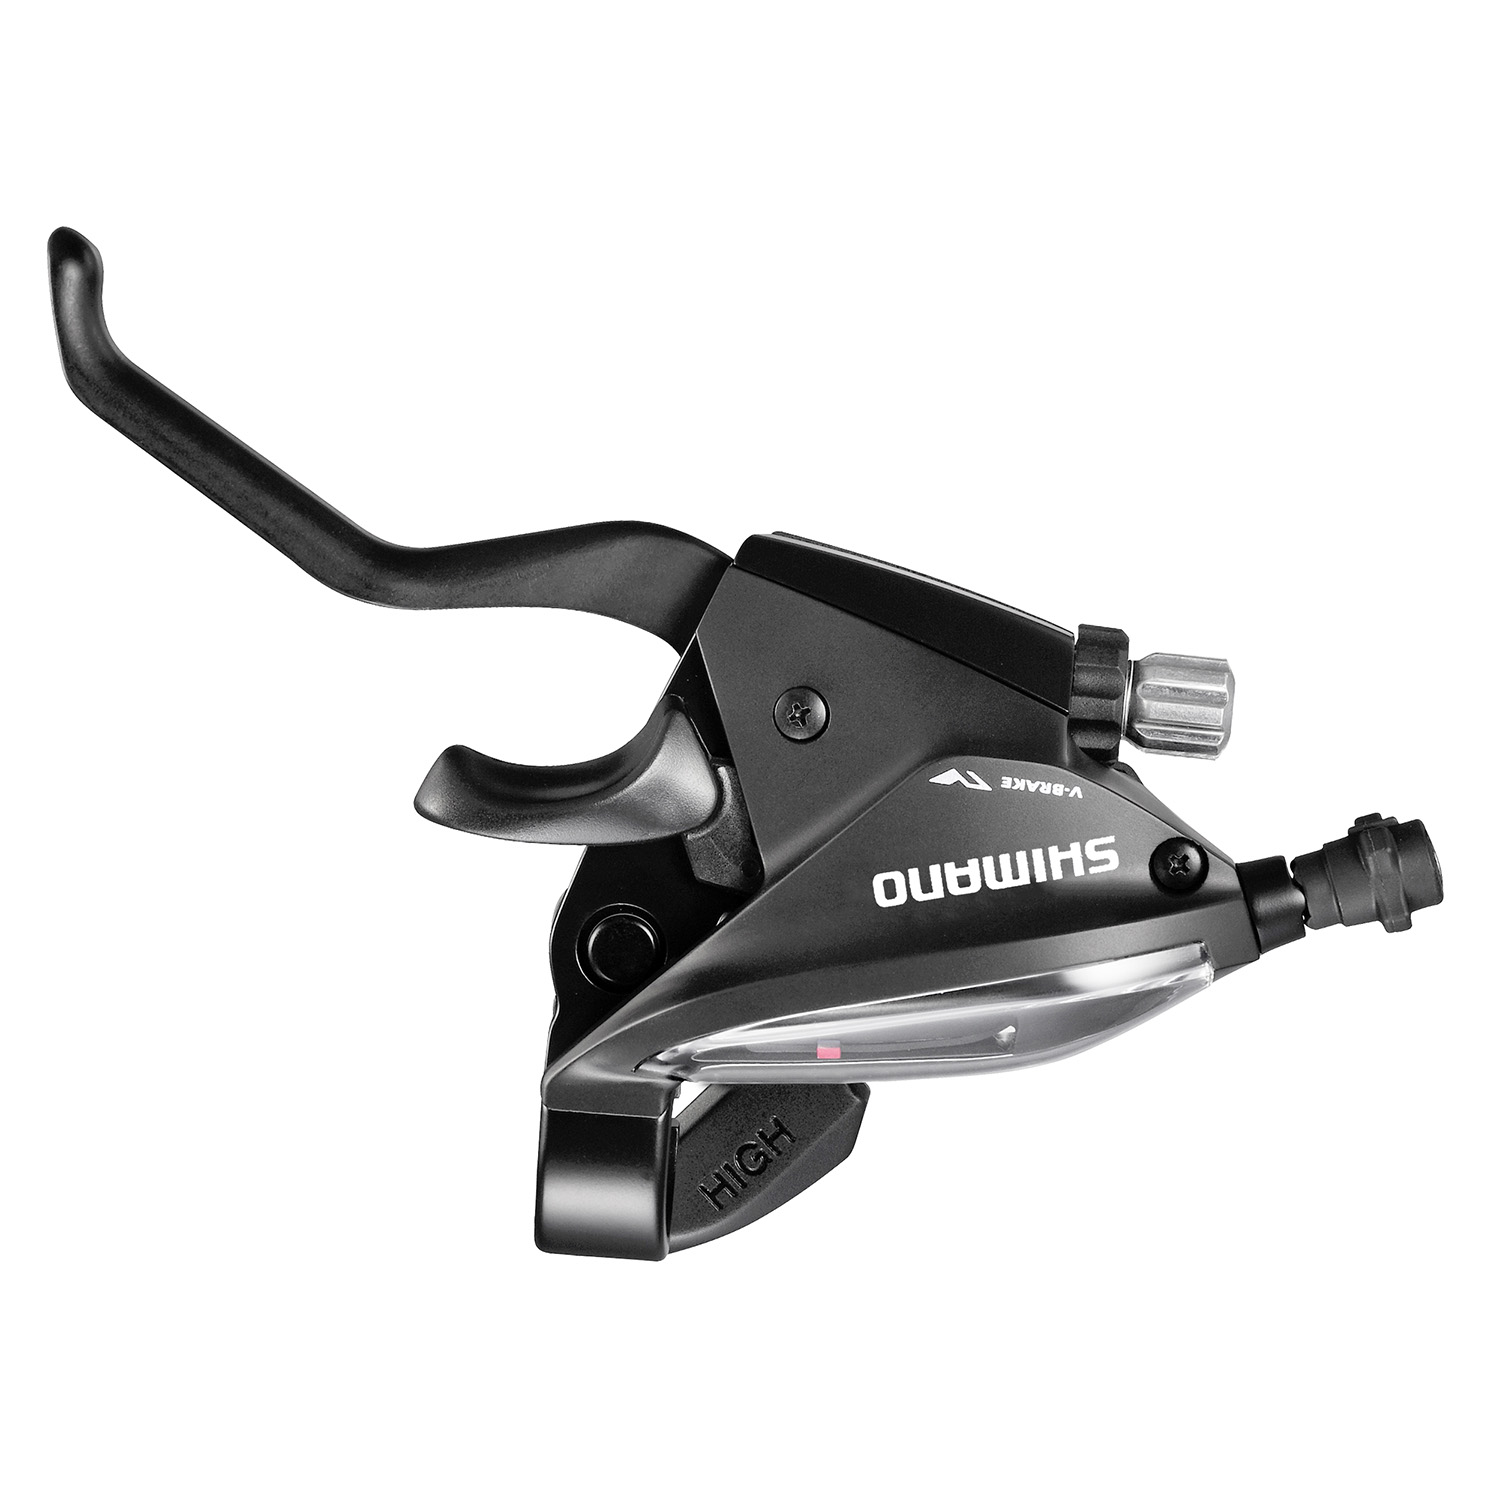 SHIMANO ST-EF500 L shift / brake lever combination – AVAILABLE IN SELECTED BIKE SHOPS